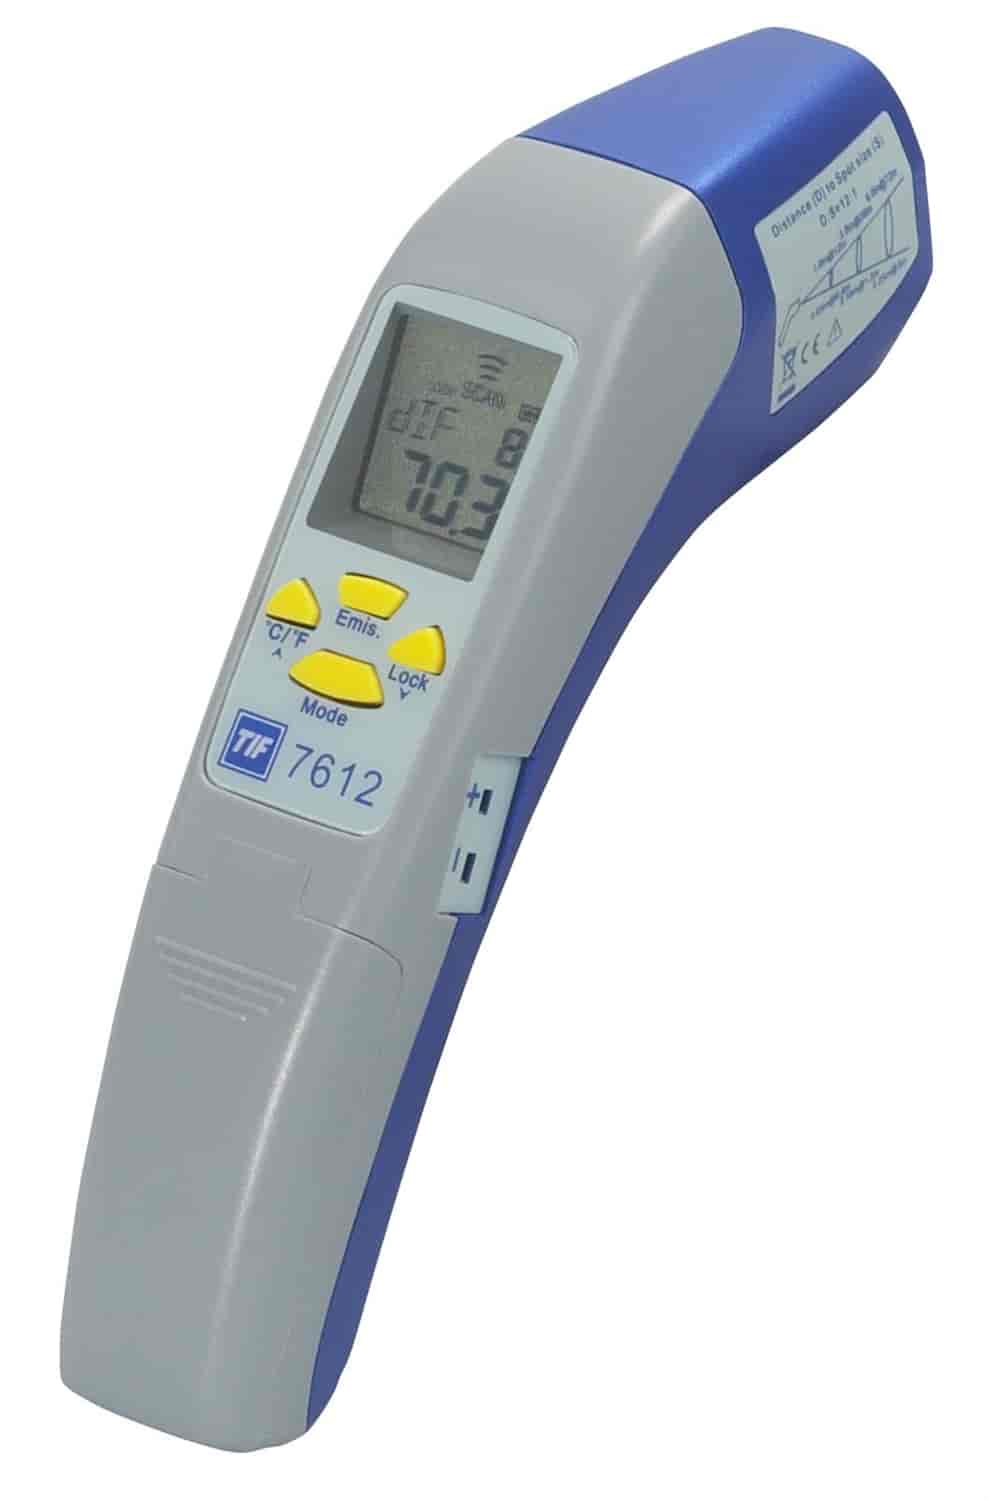 Infrared Thermometer Pro 121